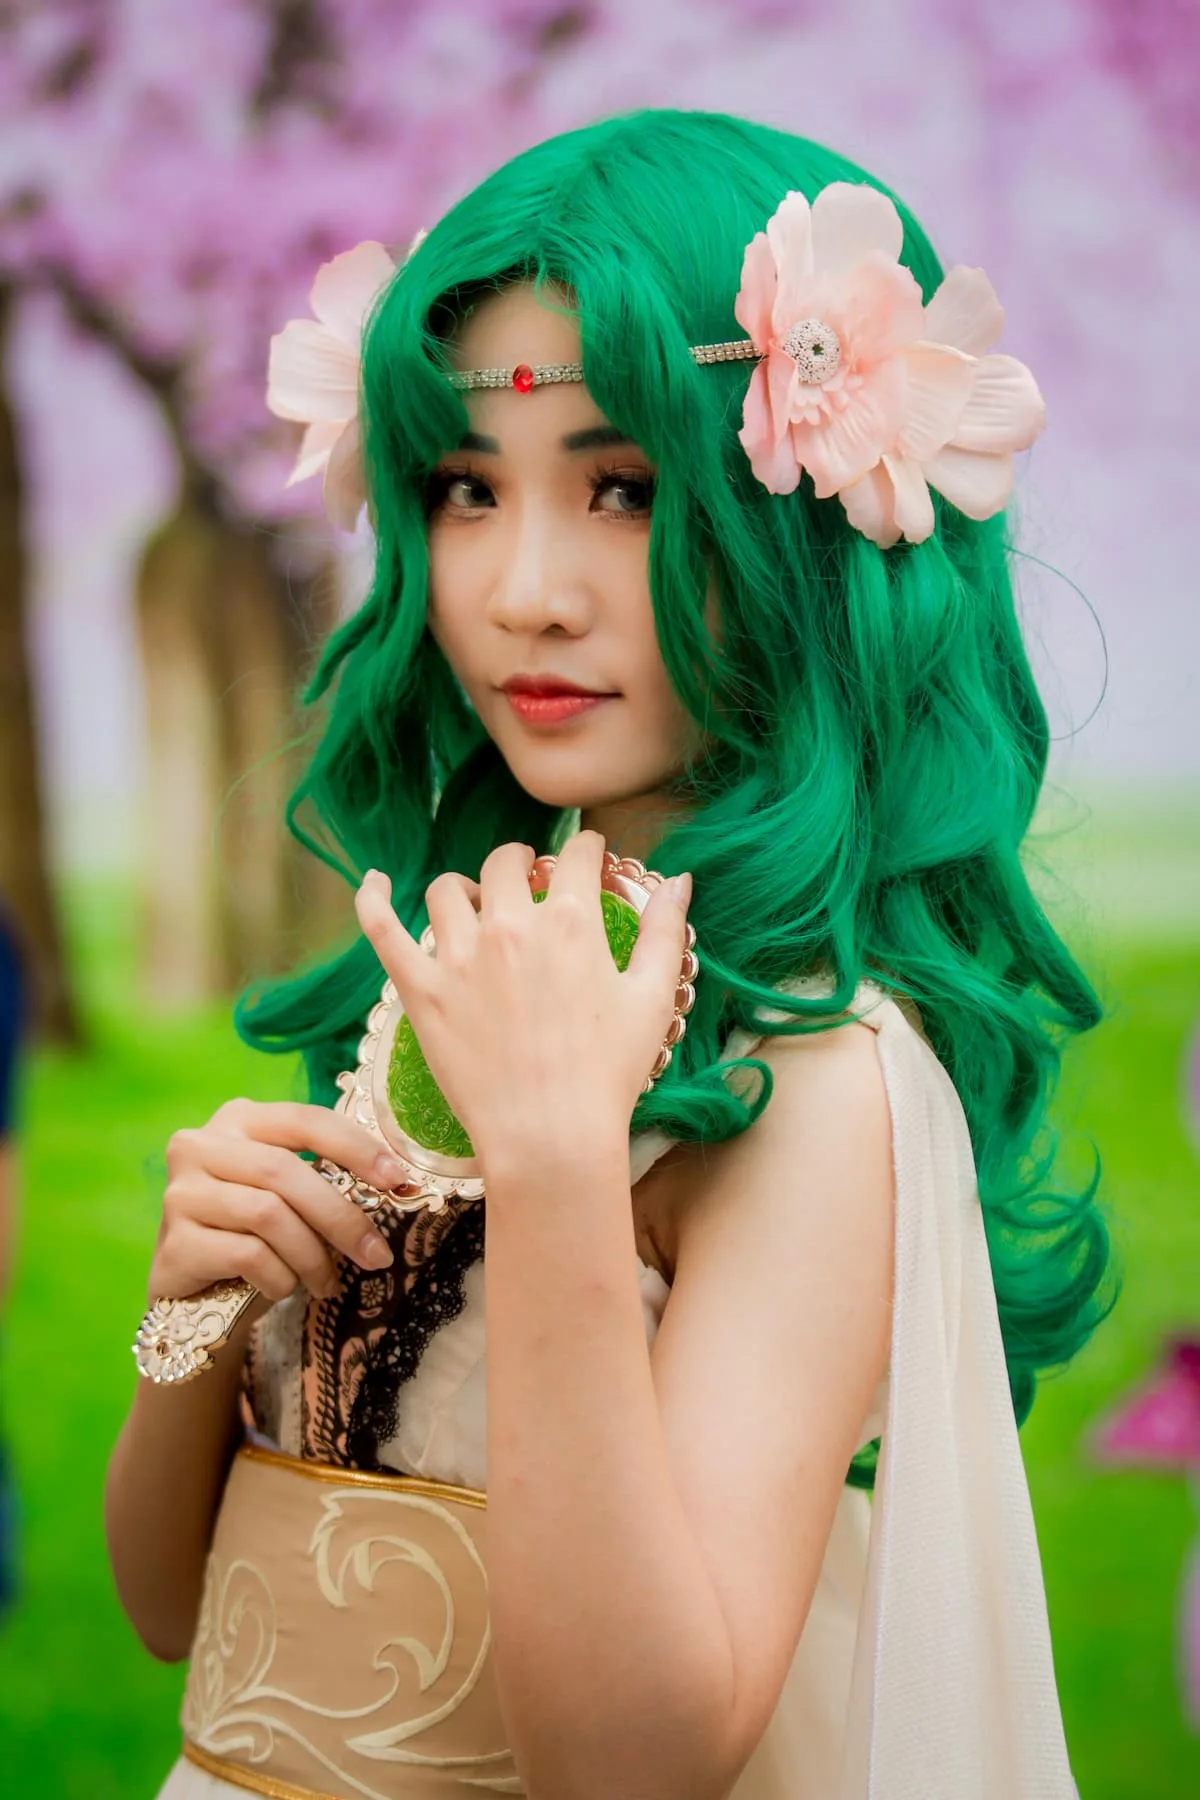 A beautiful girl just like in comics with green hair holding a small mirror